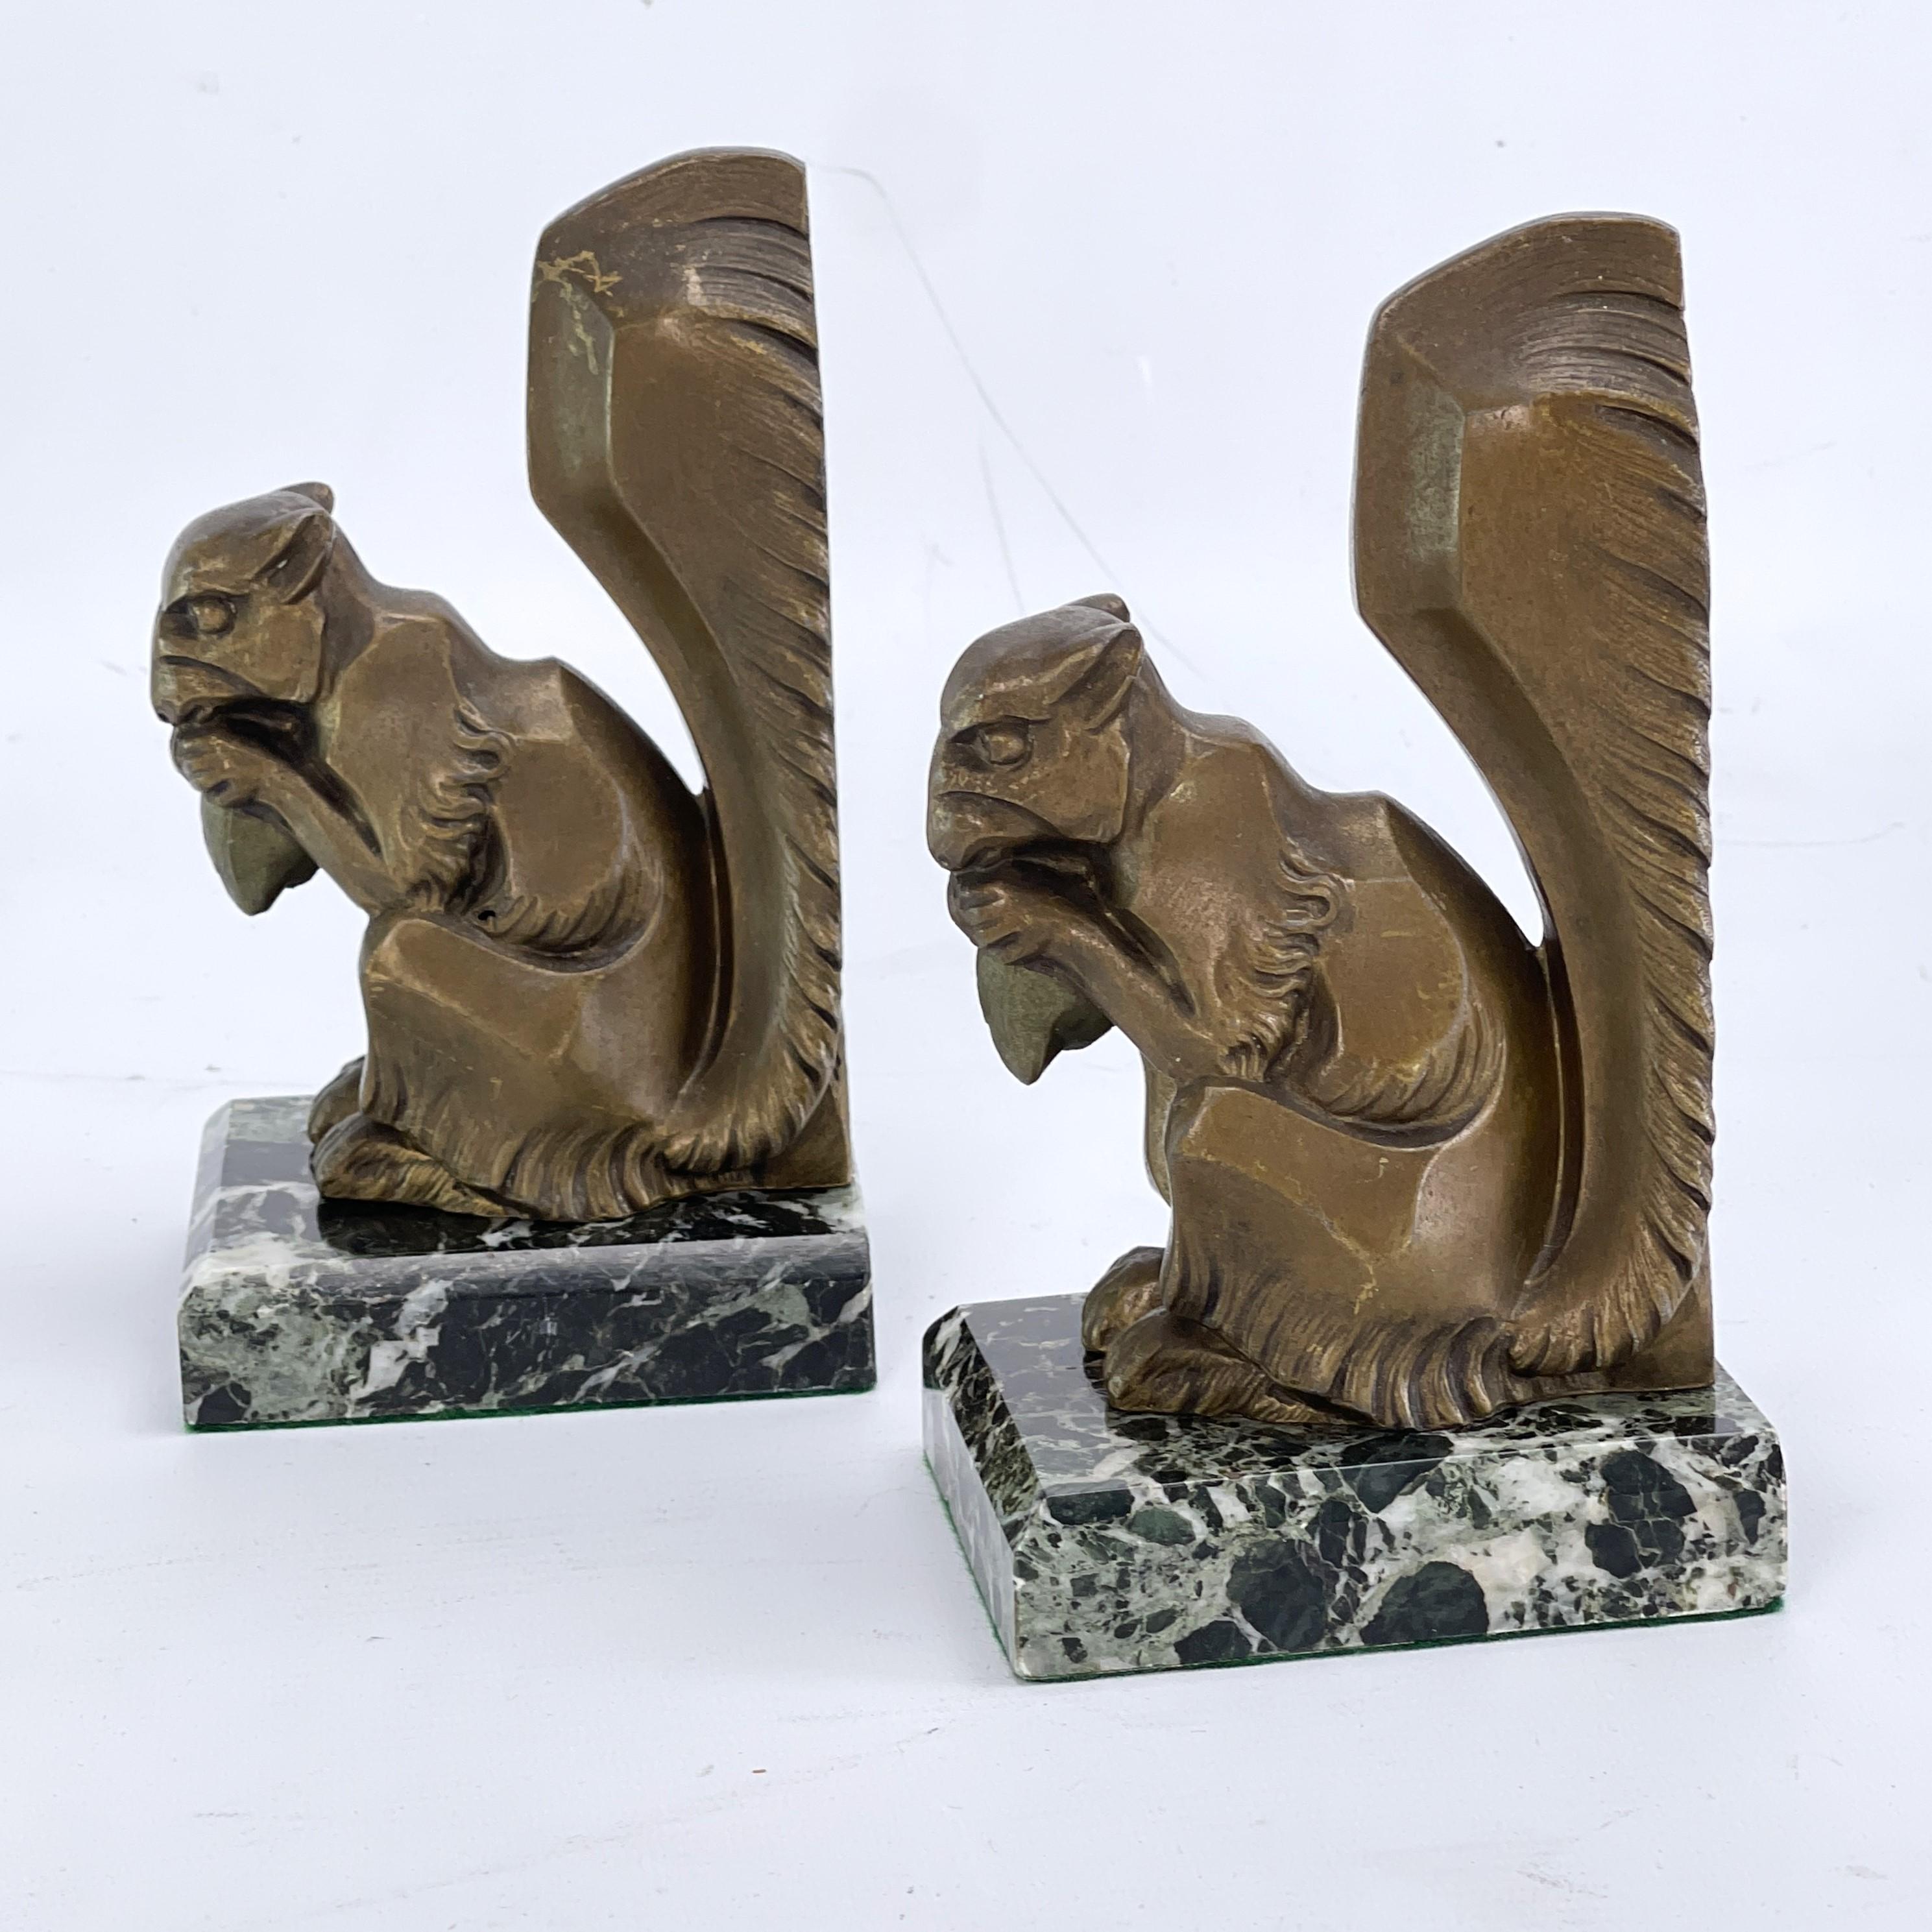 Art Deco squirrel bookends - 1930s

These beautiful squirrelsupports are originals from the 1930s and are typical of the Art Deco period.

Each cleaned item weights 0,9 kg / 2 lbs.